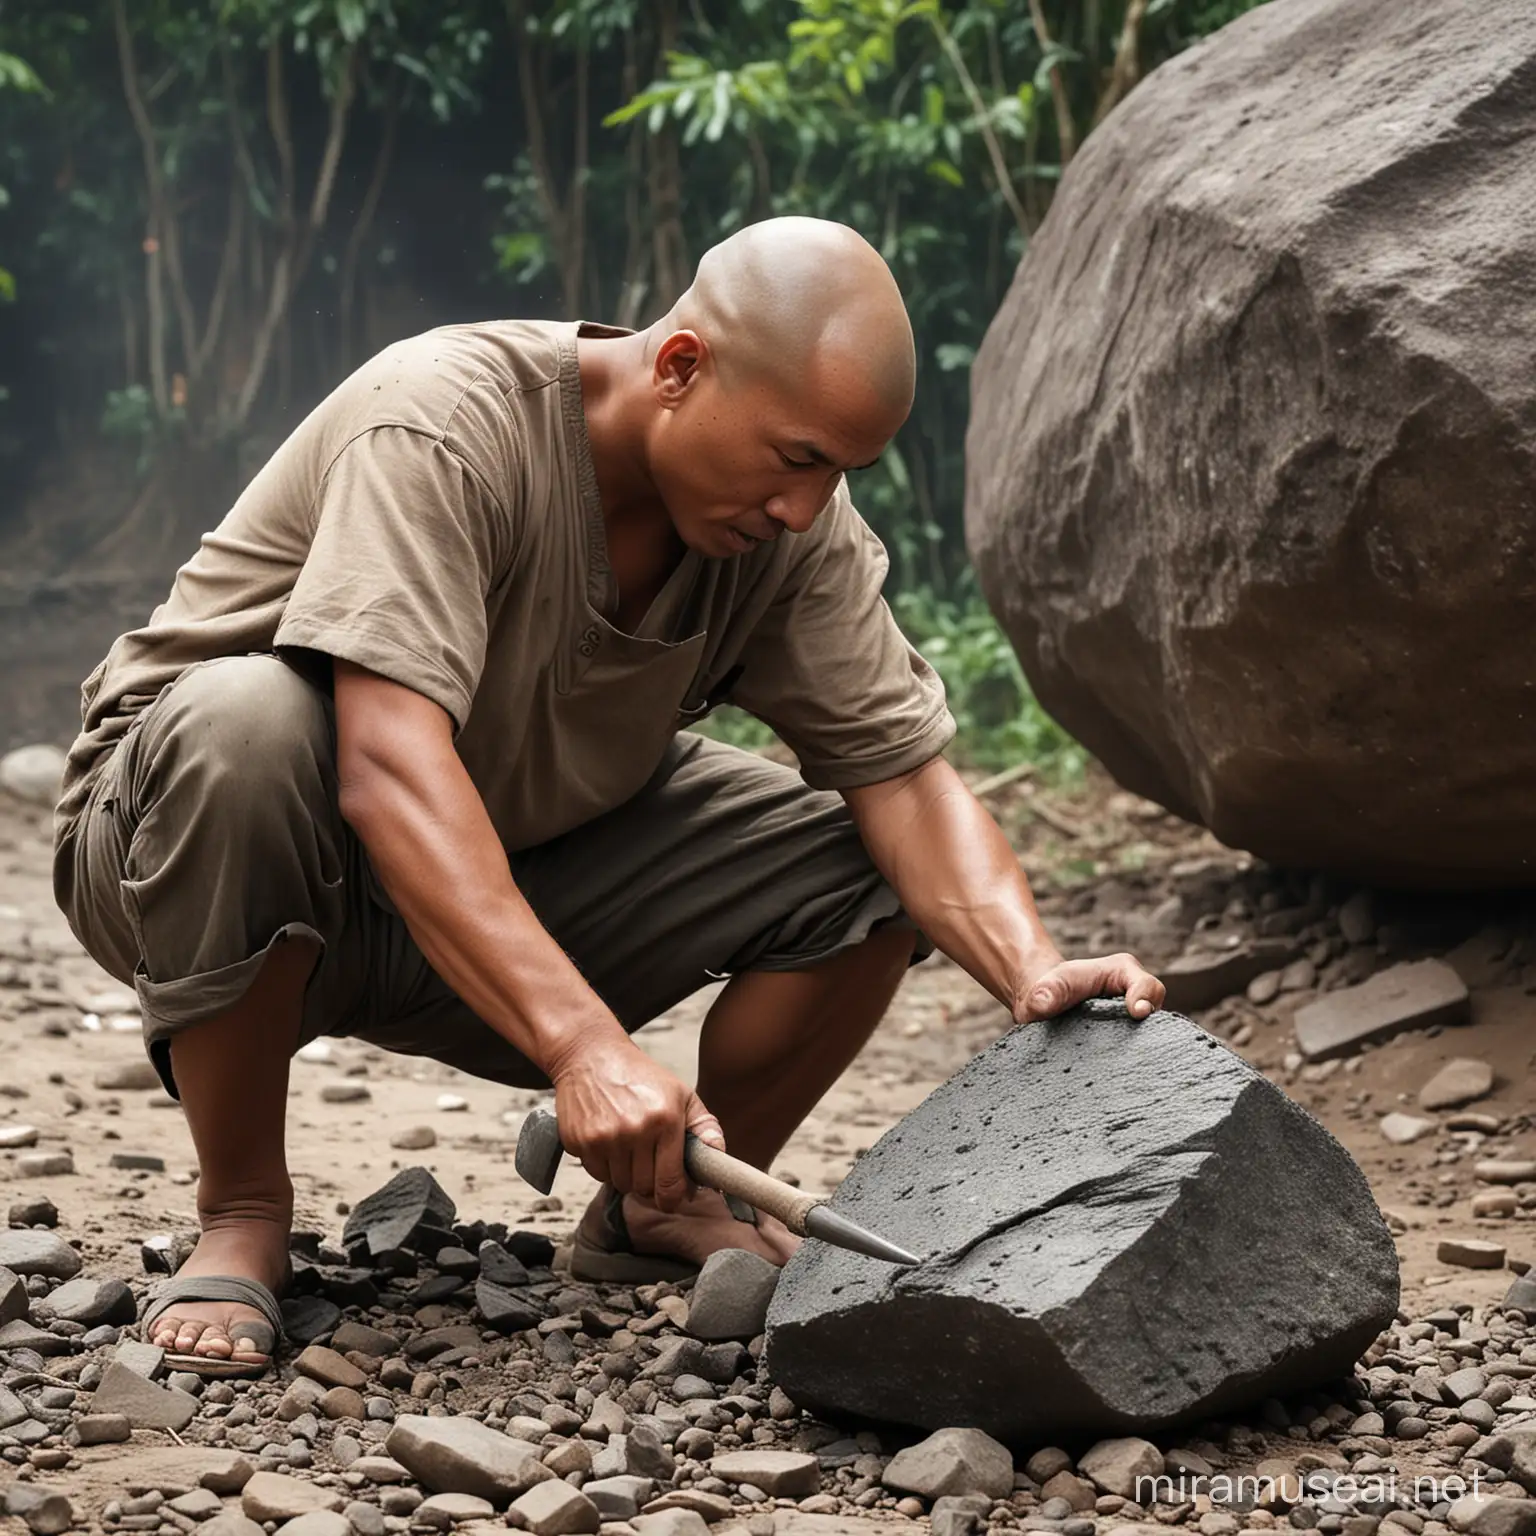 Indonesian Man Splitting Rock with Pickaxe